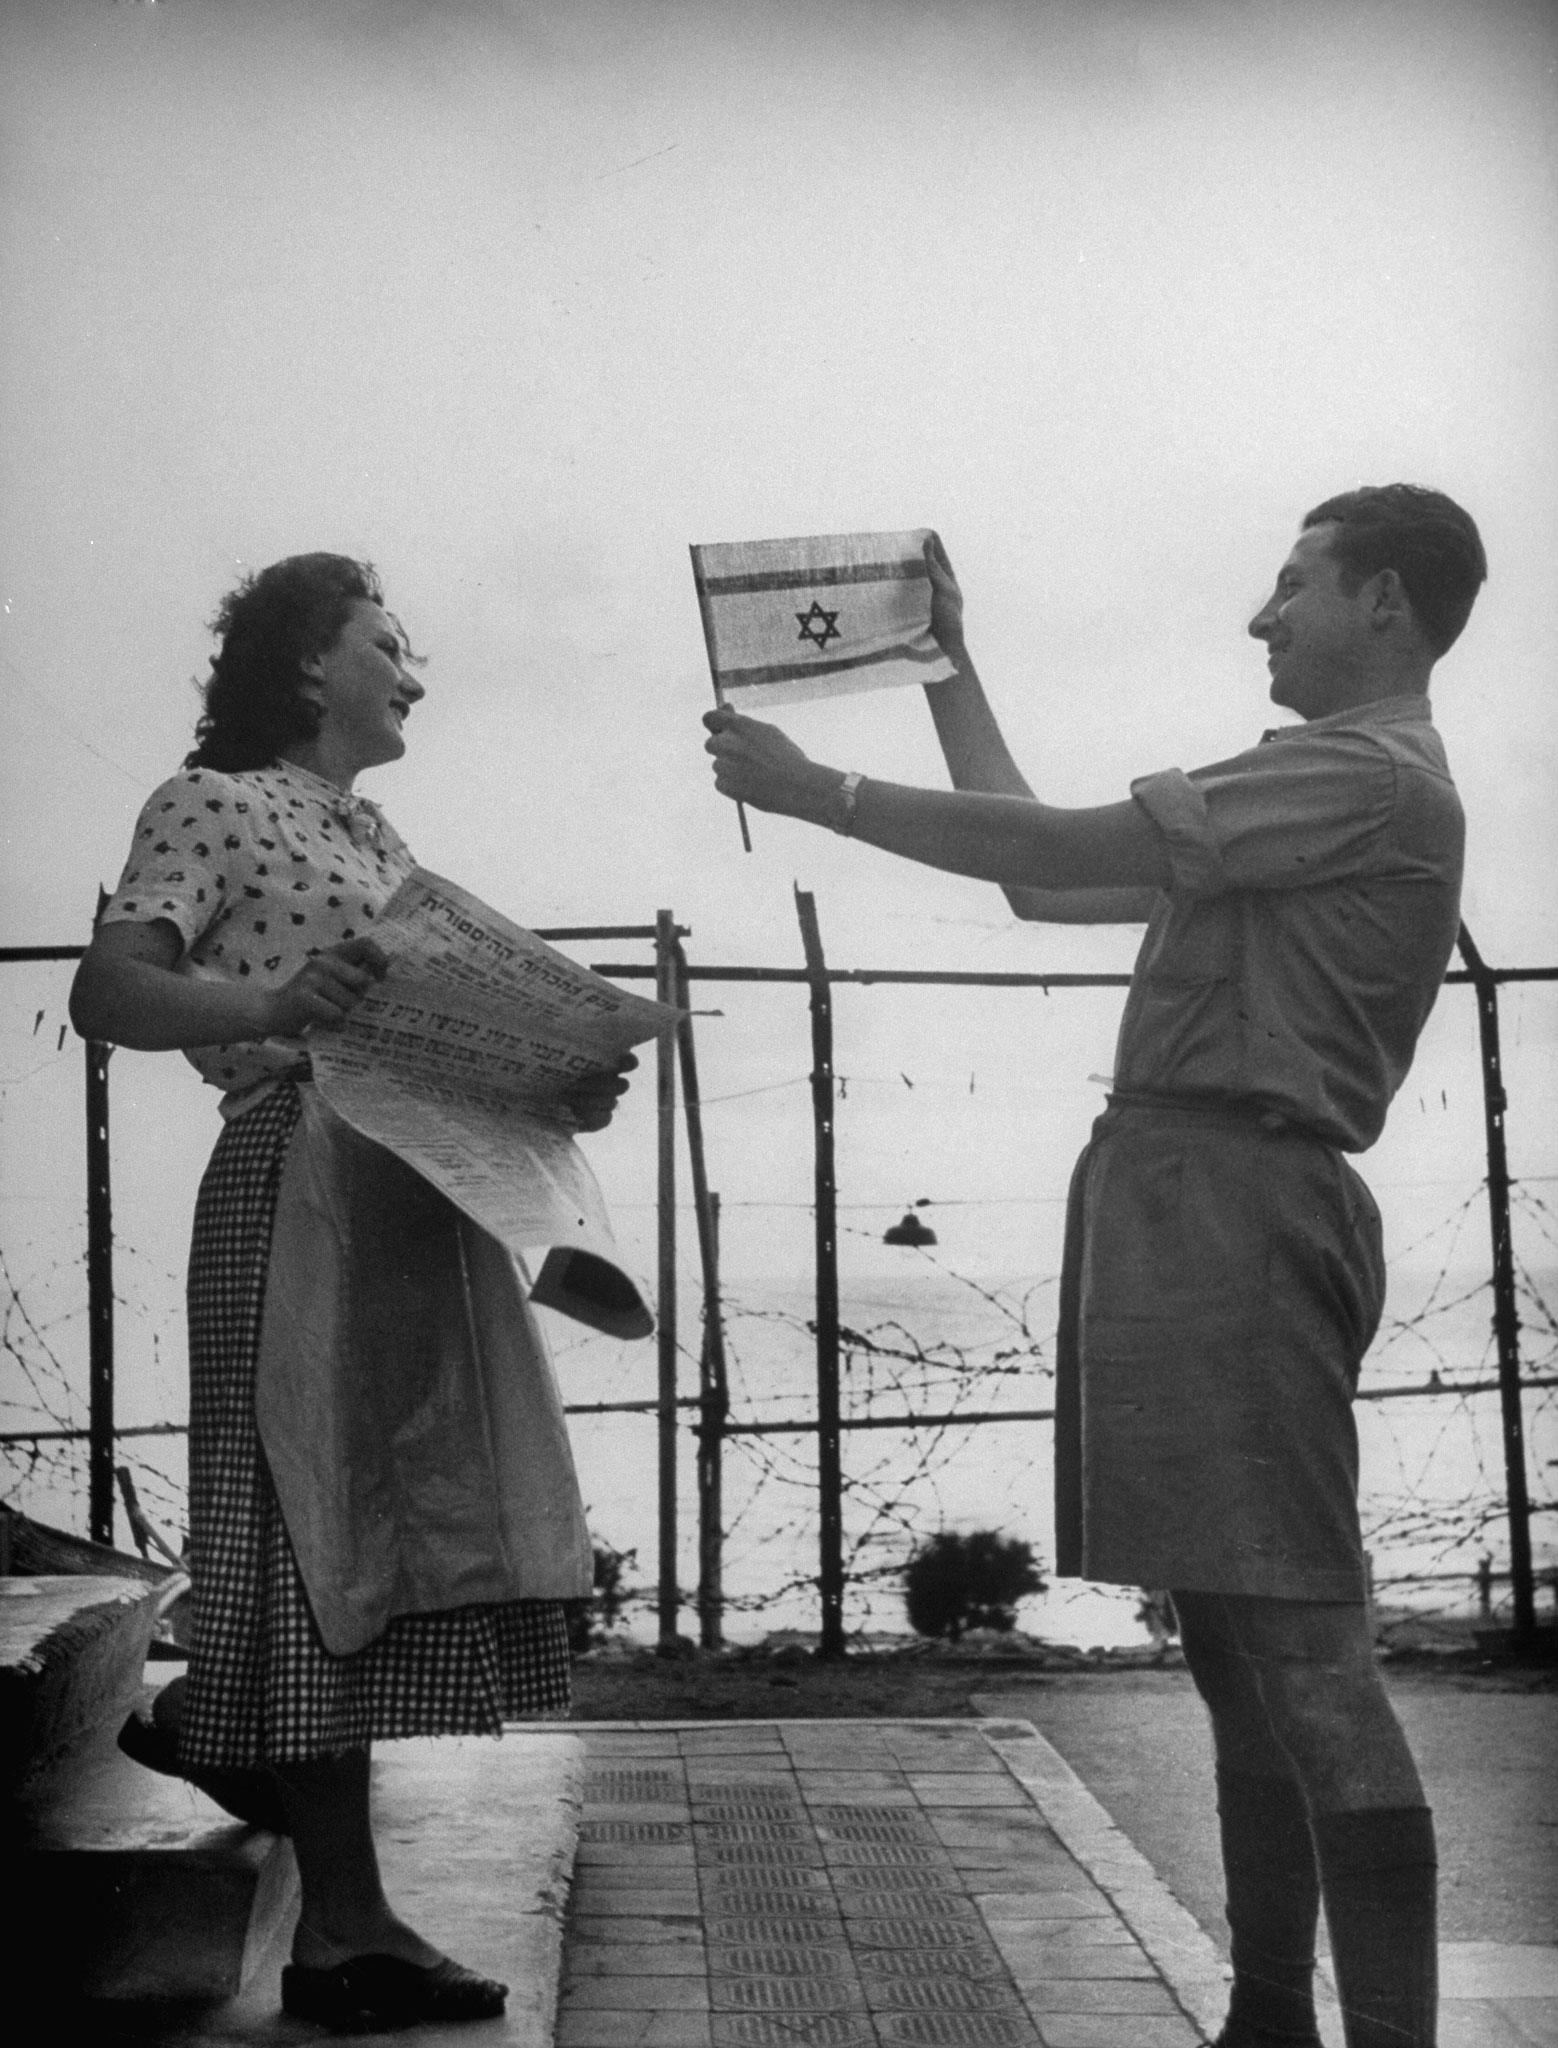 Happily displaying the Israeli flag shortly after the establishment of the state of Israel, exact location unknown, May 1948.